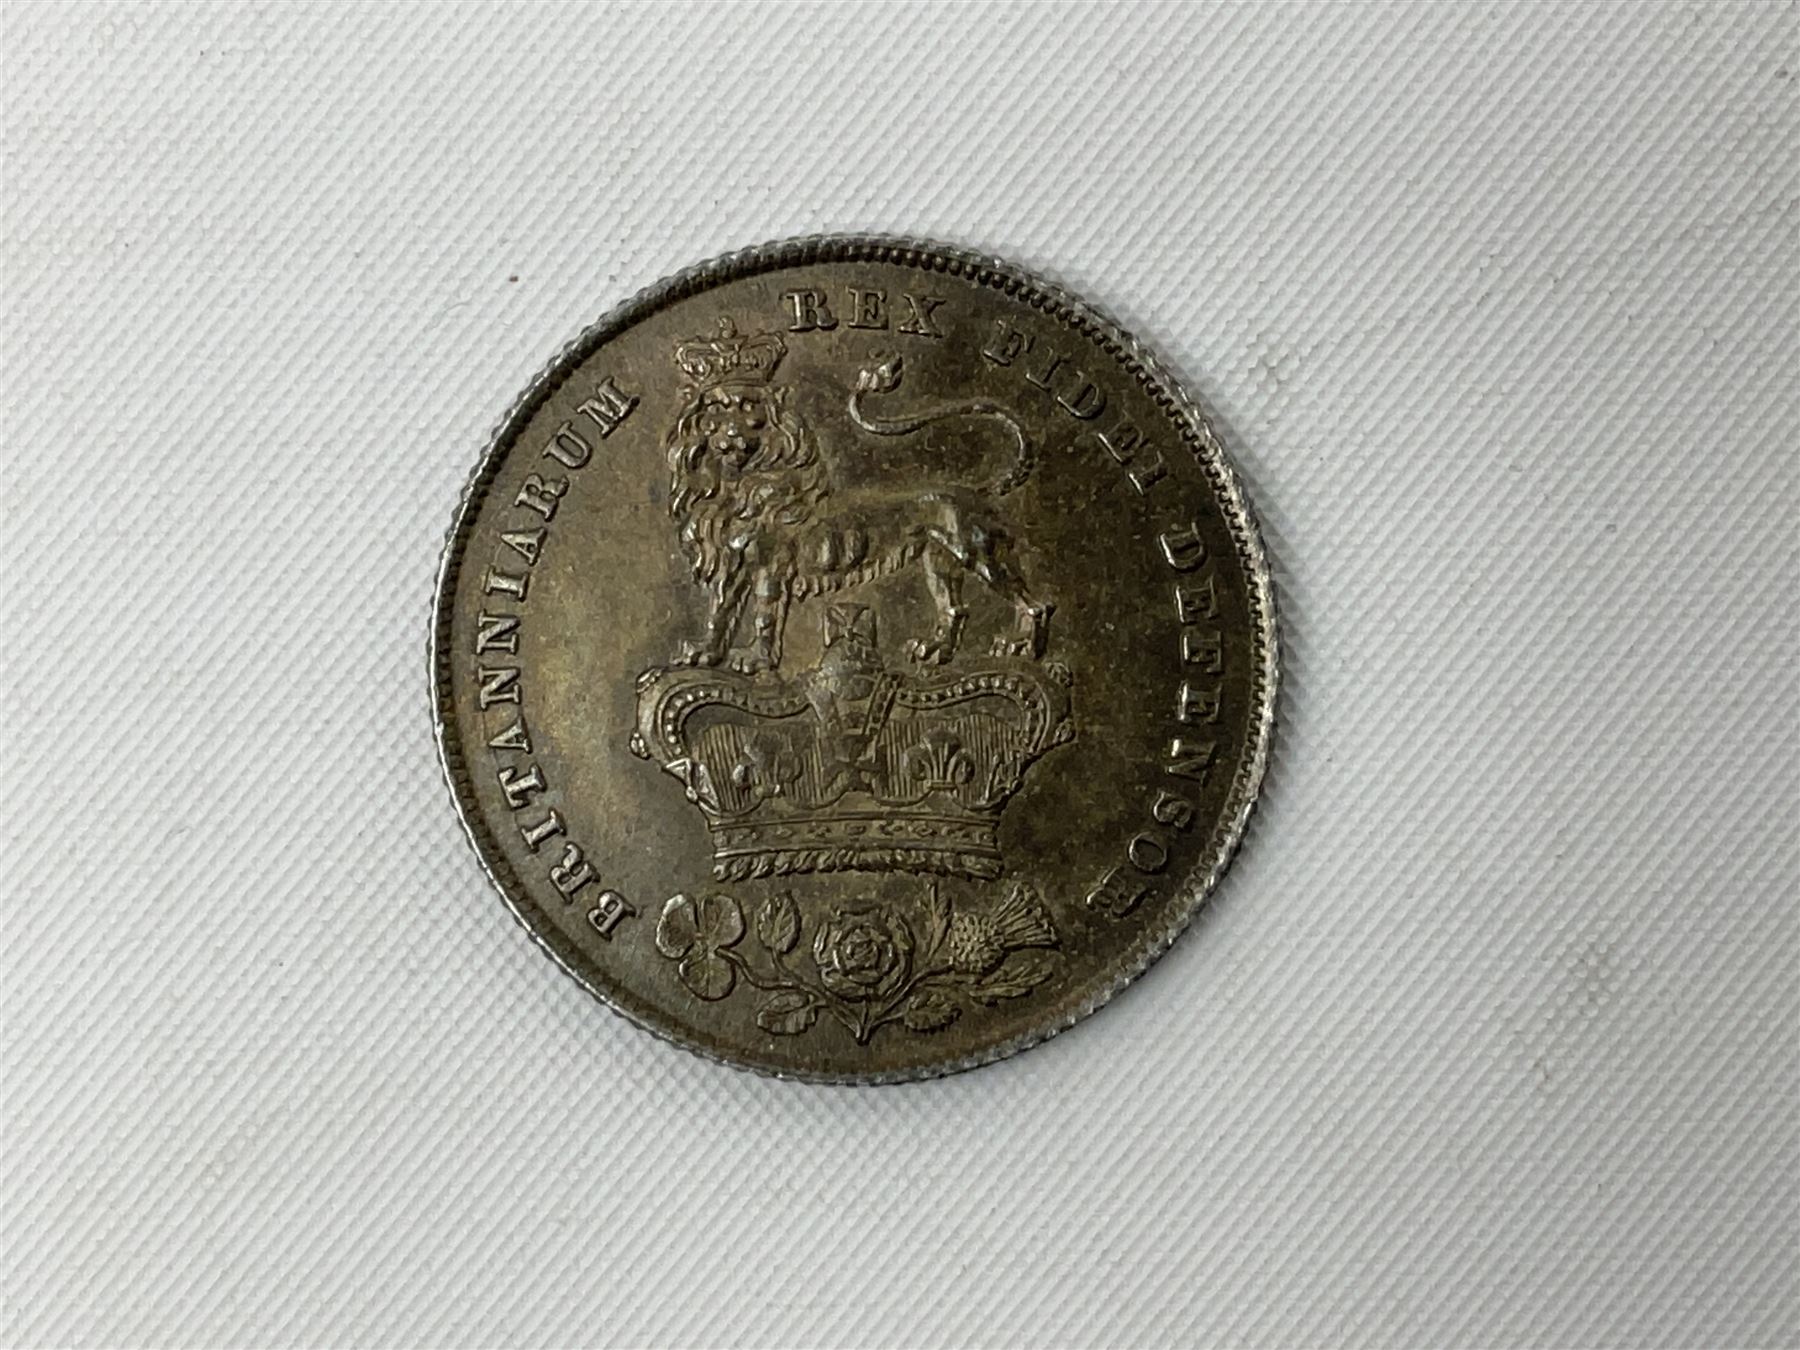 King George IV 1826 shilling coin - Image 5 of 6